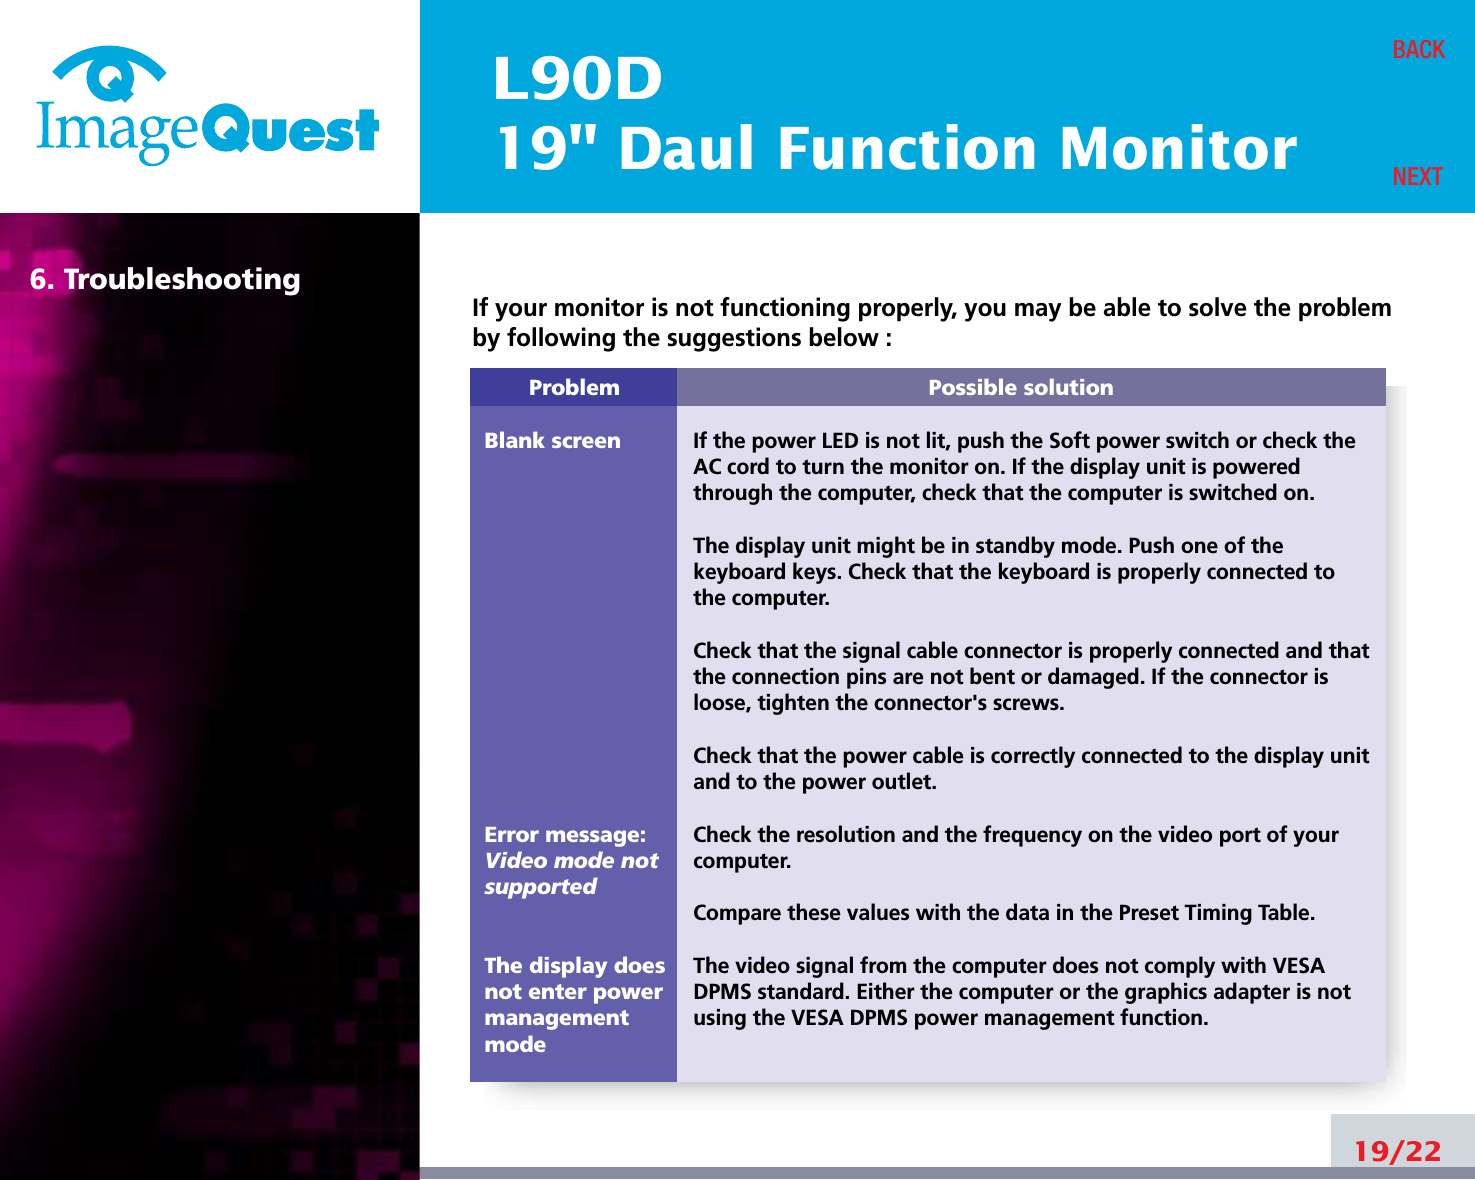 L90D19&quot; Daul Function Monitor6. Troubleshooting19/22BACKNEXTProblemBlank screenError message:Video mode notsupportedThe display does not enter power managementmodePossible solutionIf the power LED is not lit, push the Soft power switch or check theAC cord to turn the monitor on. If the display unit is poweredthrough the computer, check that the computer is switched on.The display unit might be in standby mode. Push one of thekeyboard keys. Check that the keyboard is properly connected tothe computer.Check that the signal cable connector is properly connected and thatthe connection pins are not bent or damaged. If the connector isloose, tighten the connector&apos;s screws.Check that the power cable is correctly connected to the display unitand to the power outlet. Check the resolution and the frequency on the video port of yourcomputer.Compare these values with the data in the Preset Timing Table.The video signal from the computer does not comply with VESADPMS standard. Either the computer or the graphics adapter is notusing the VESA DPMS power management function.If your monitor is not functioning properly, you may be able to solve the problemby following the suggestions below :